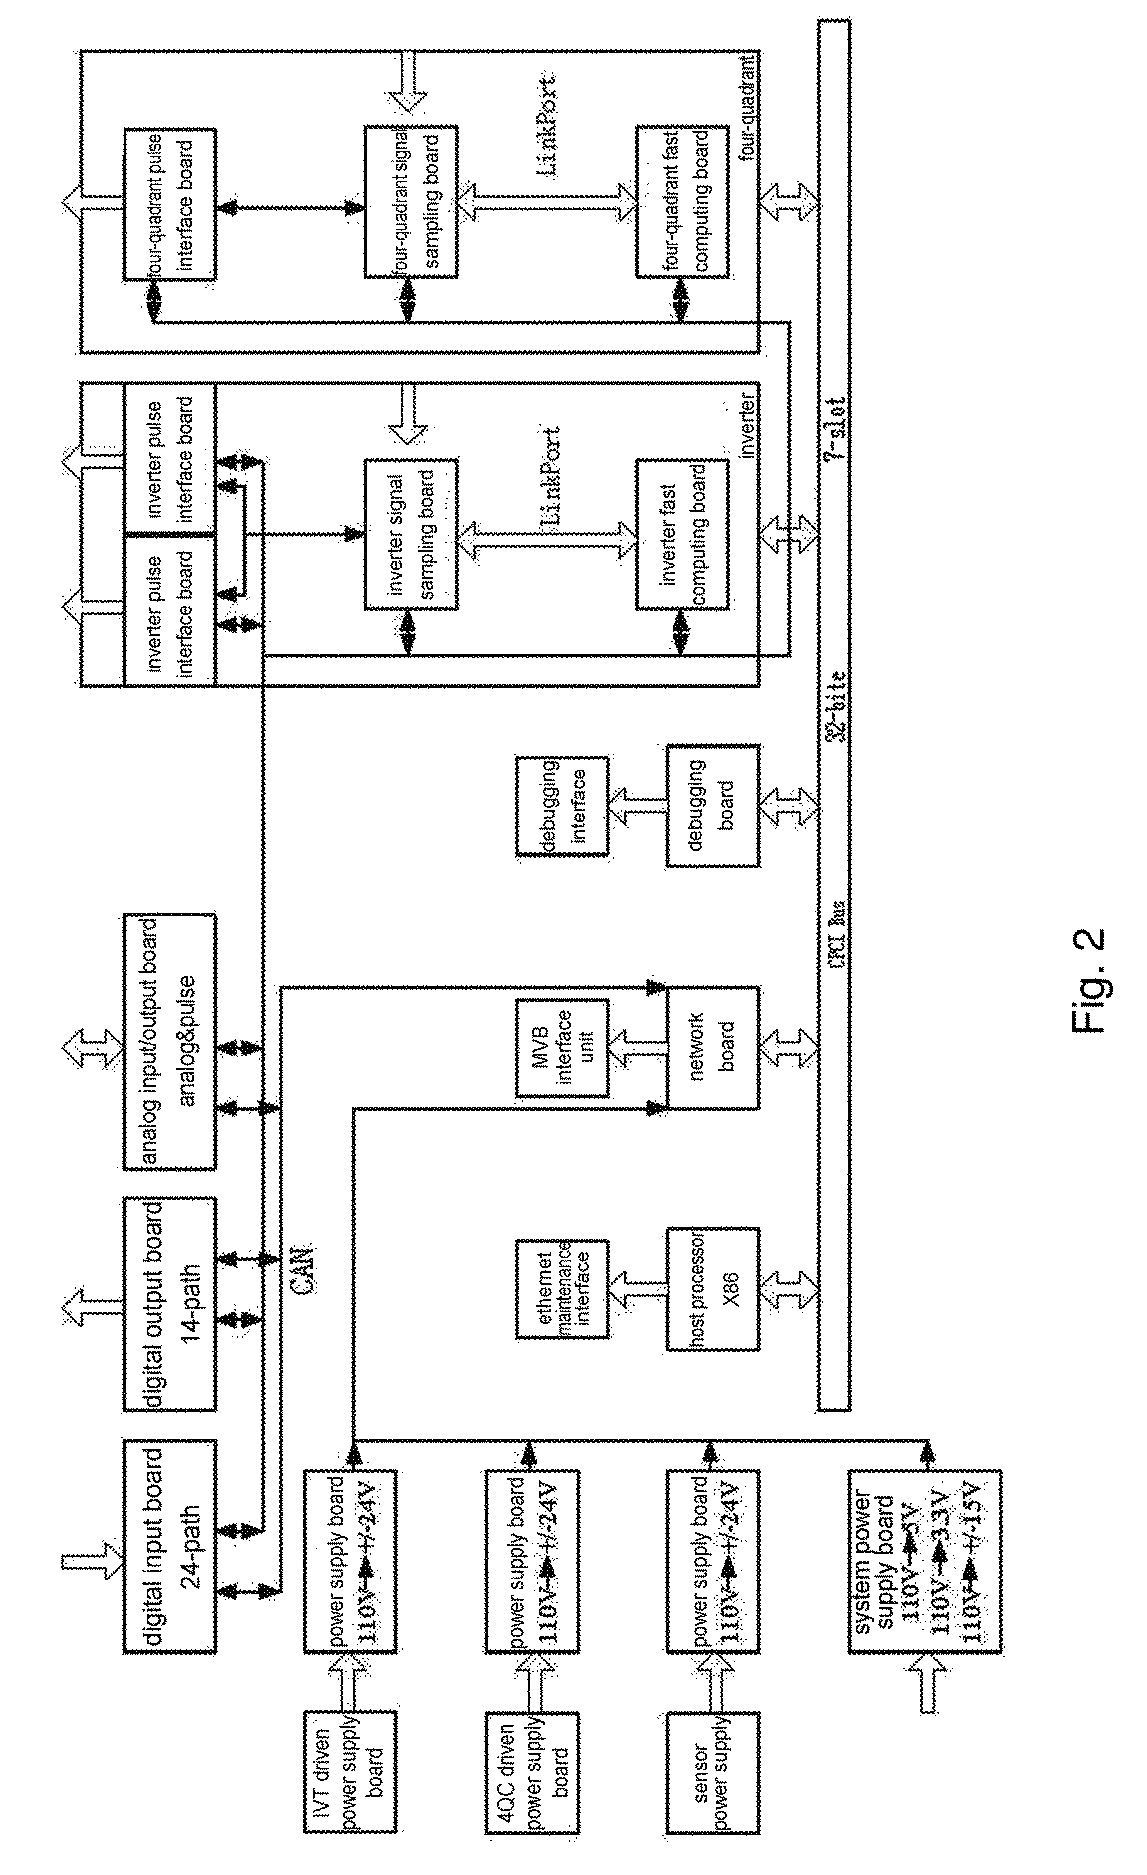 Traction control system for electric multiple units